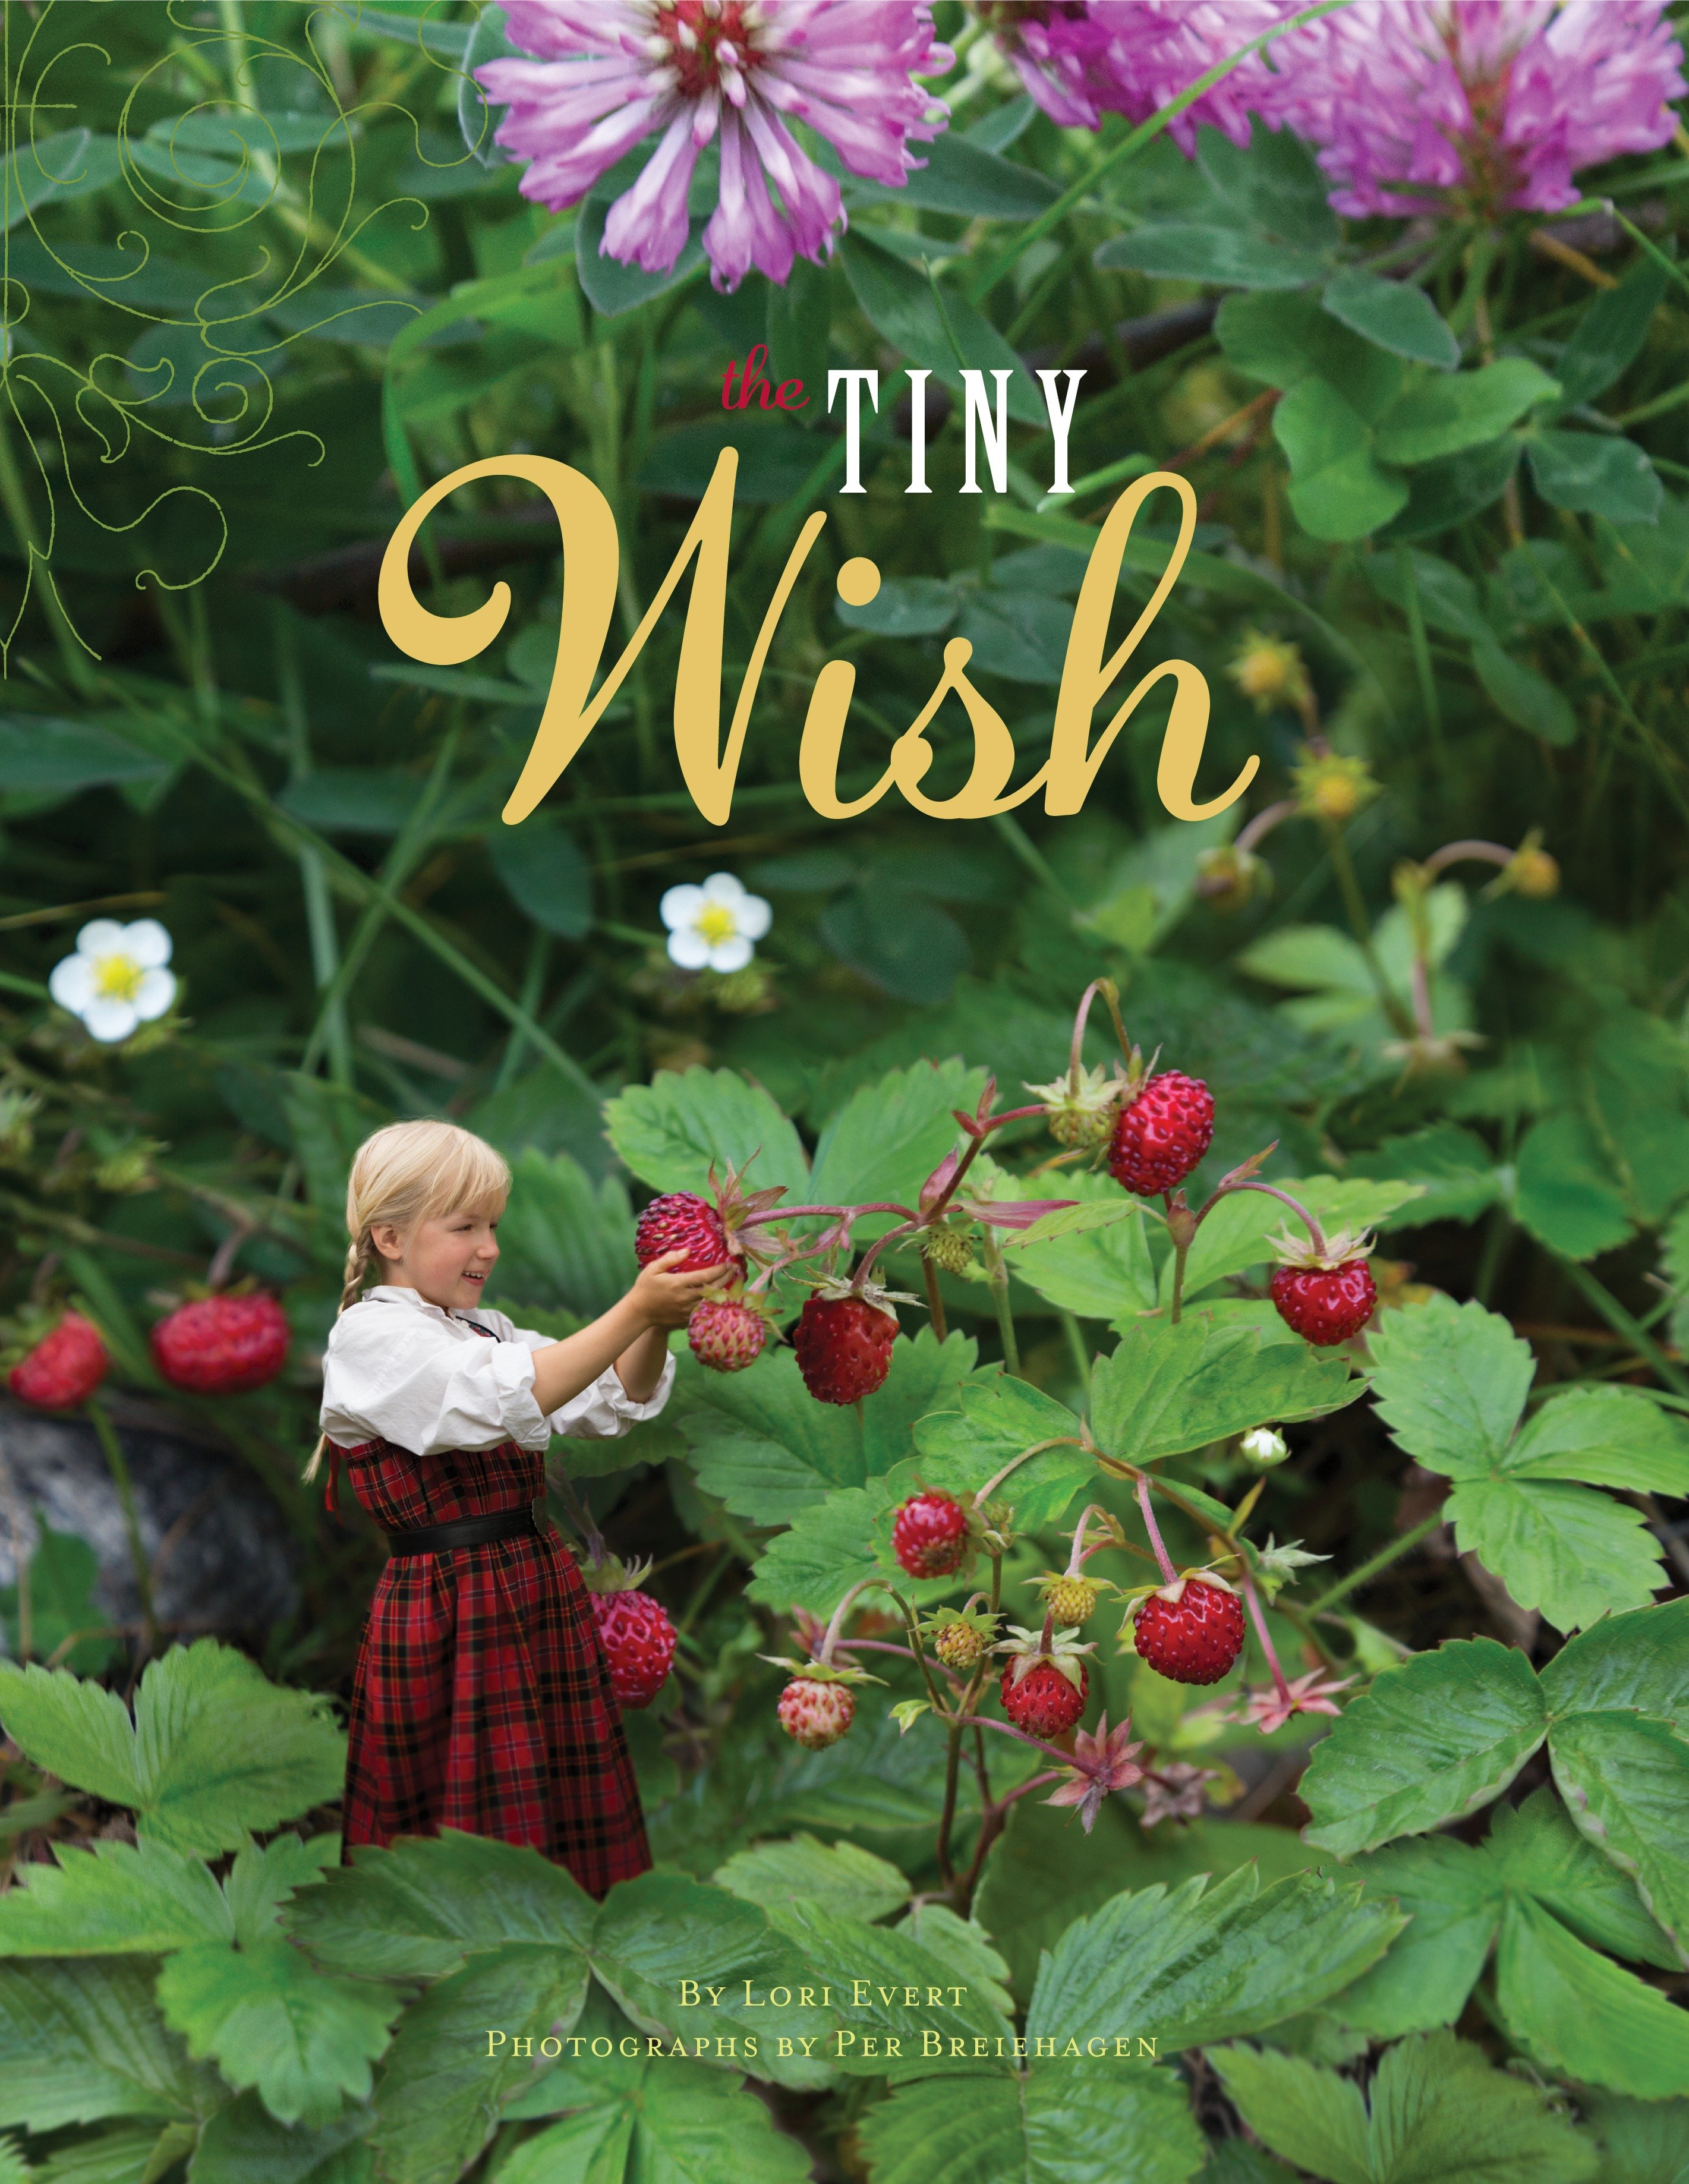 The tiny wish cover image